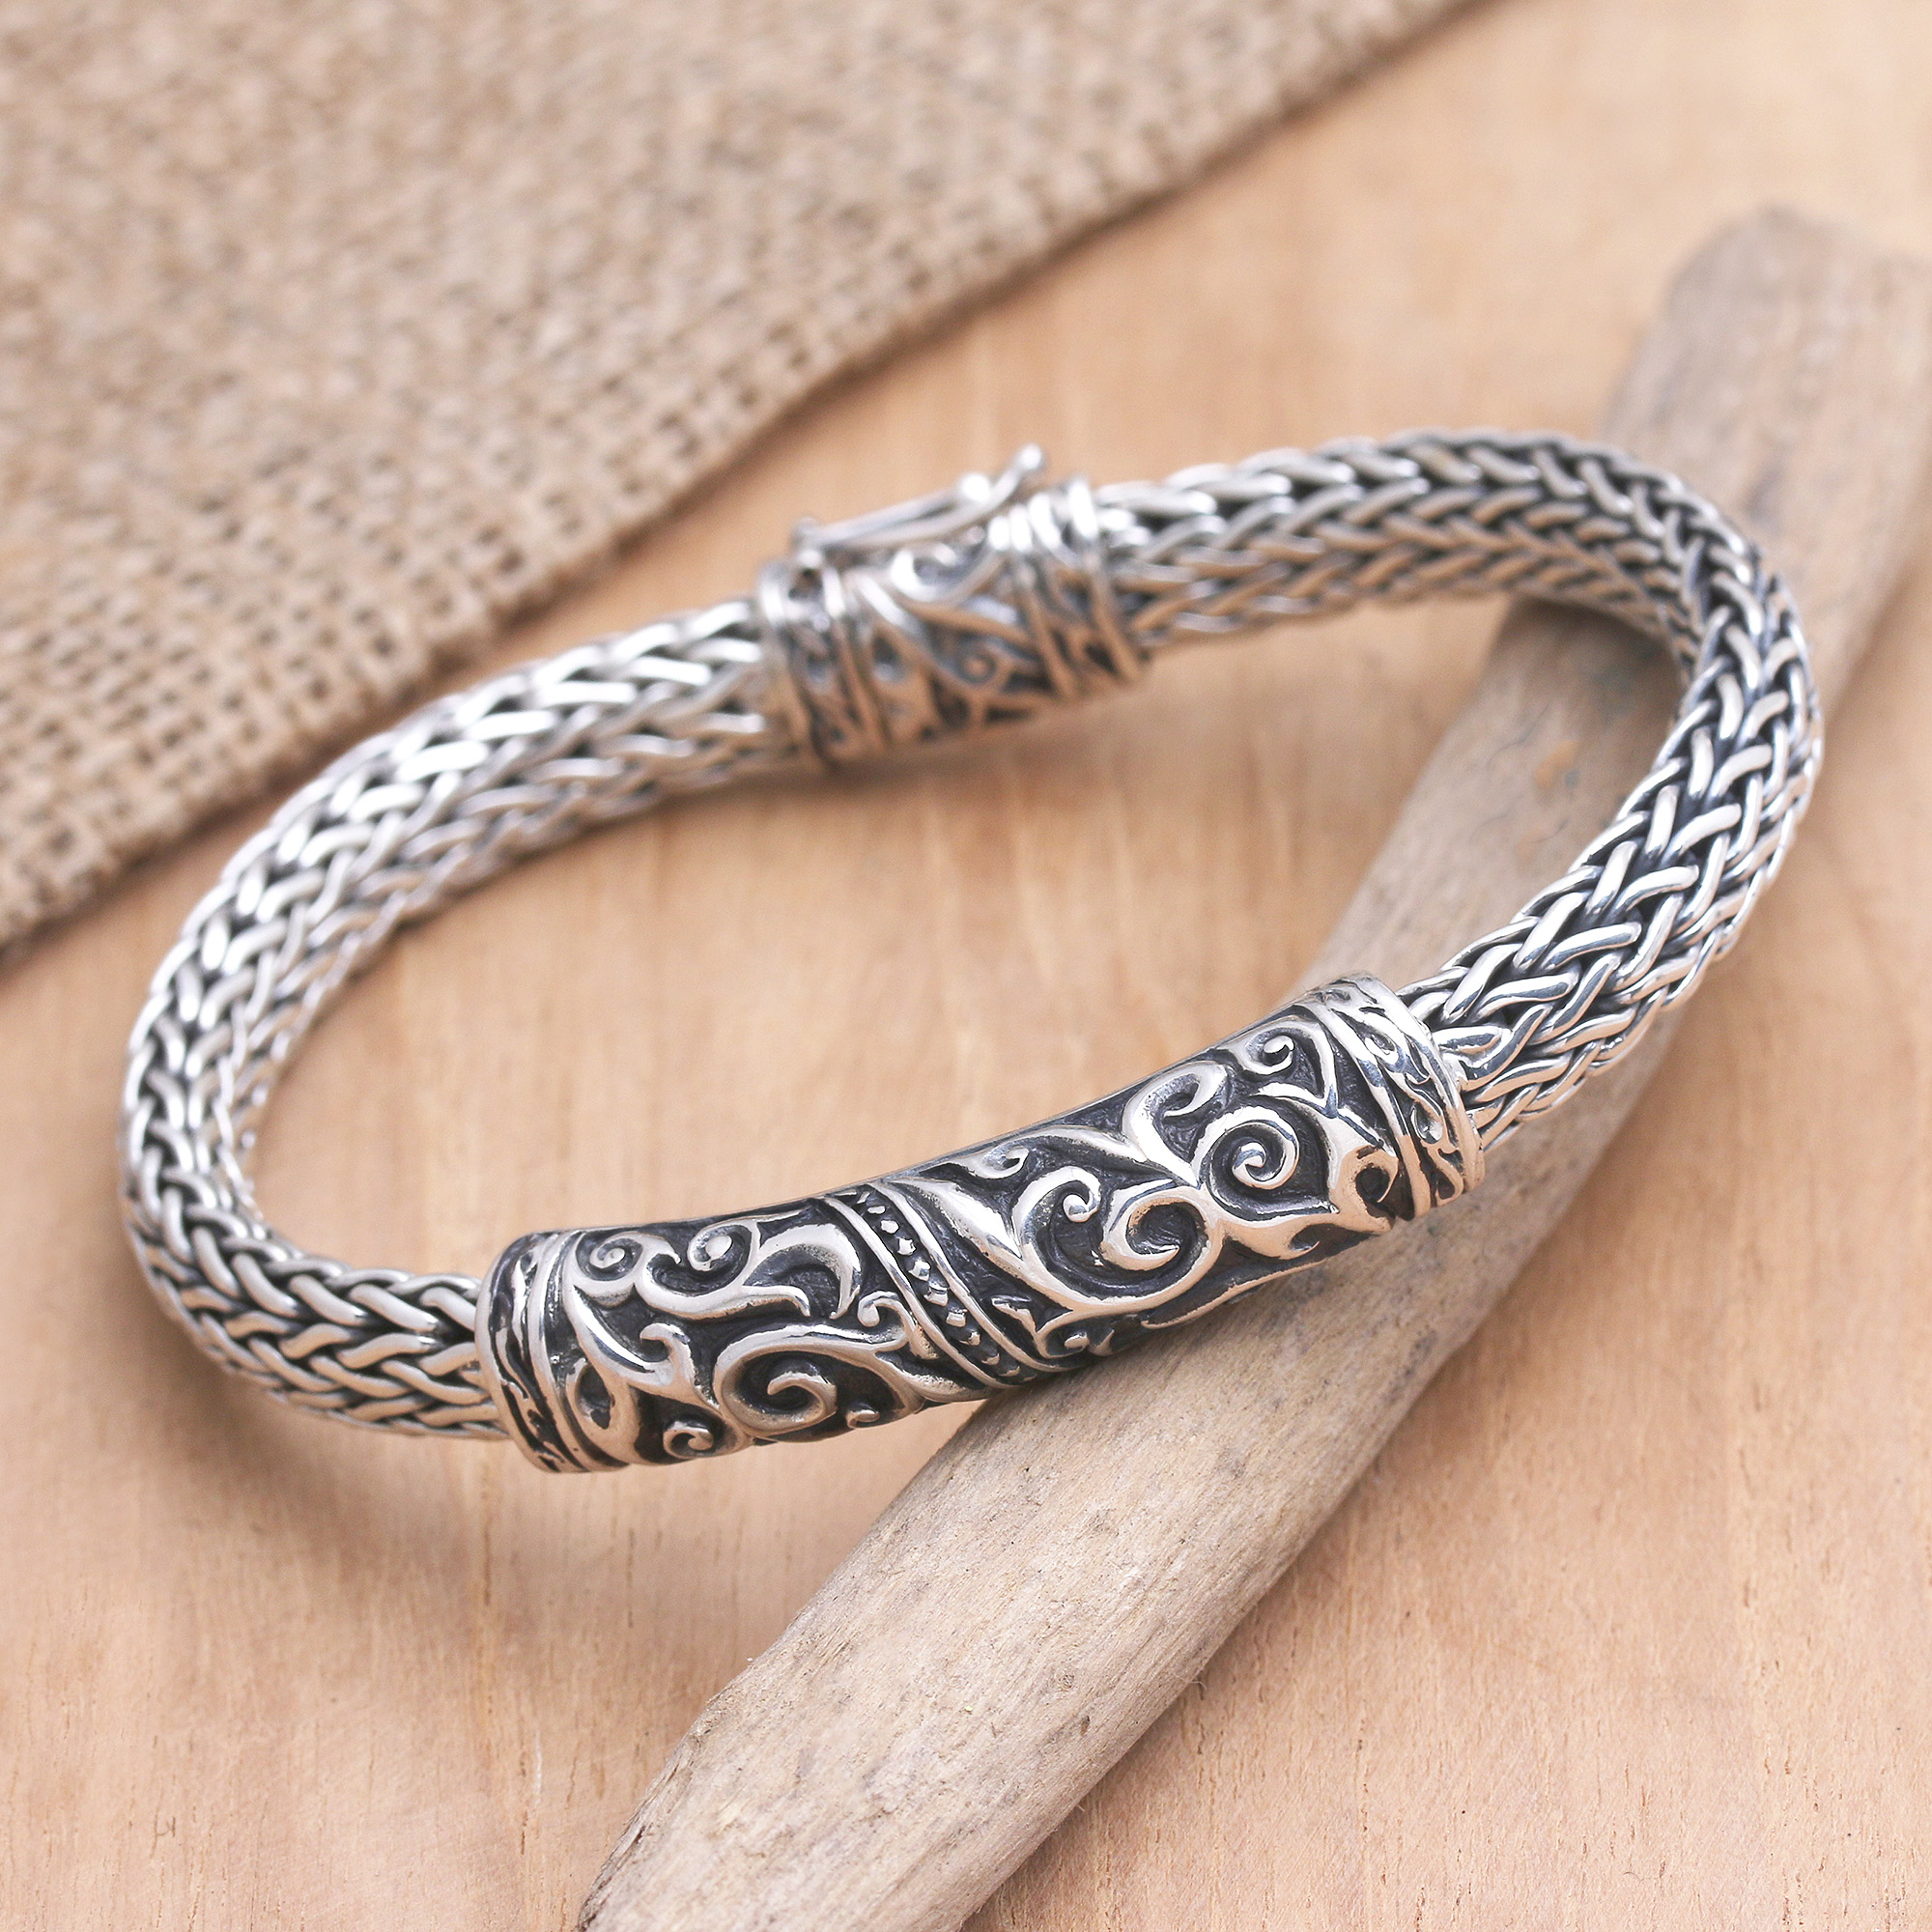 Stay Strong,'Handmade Silver and Leather Men's Bracelet from Bali